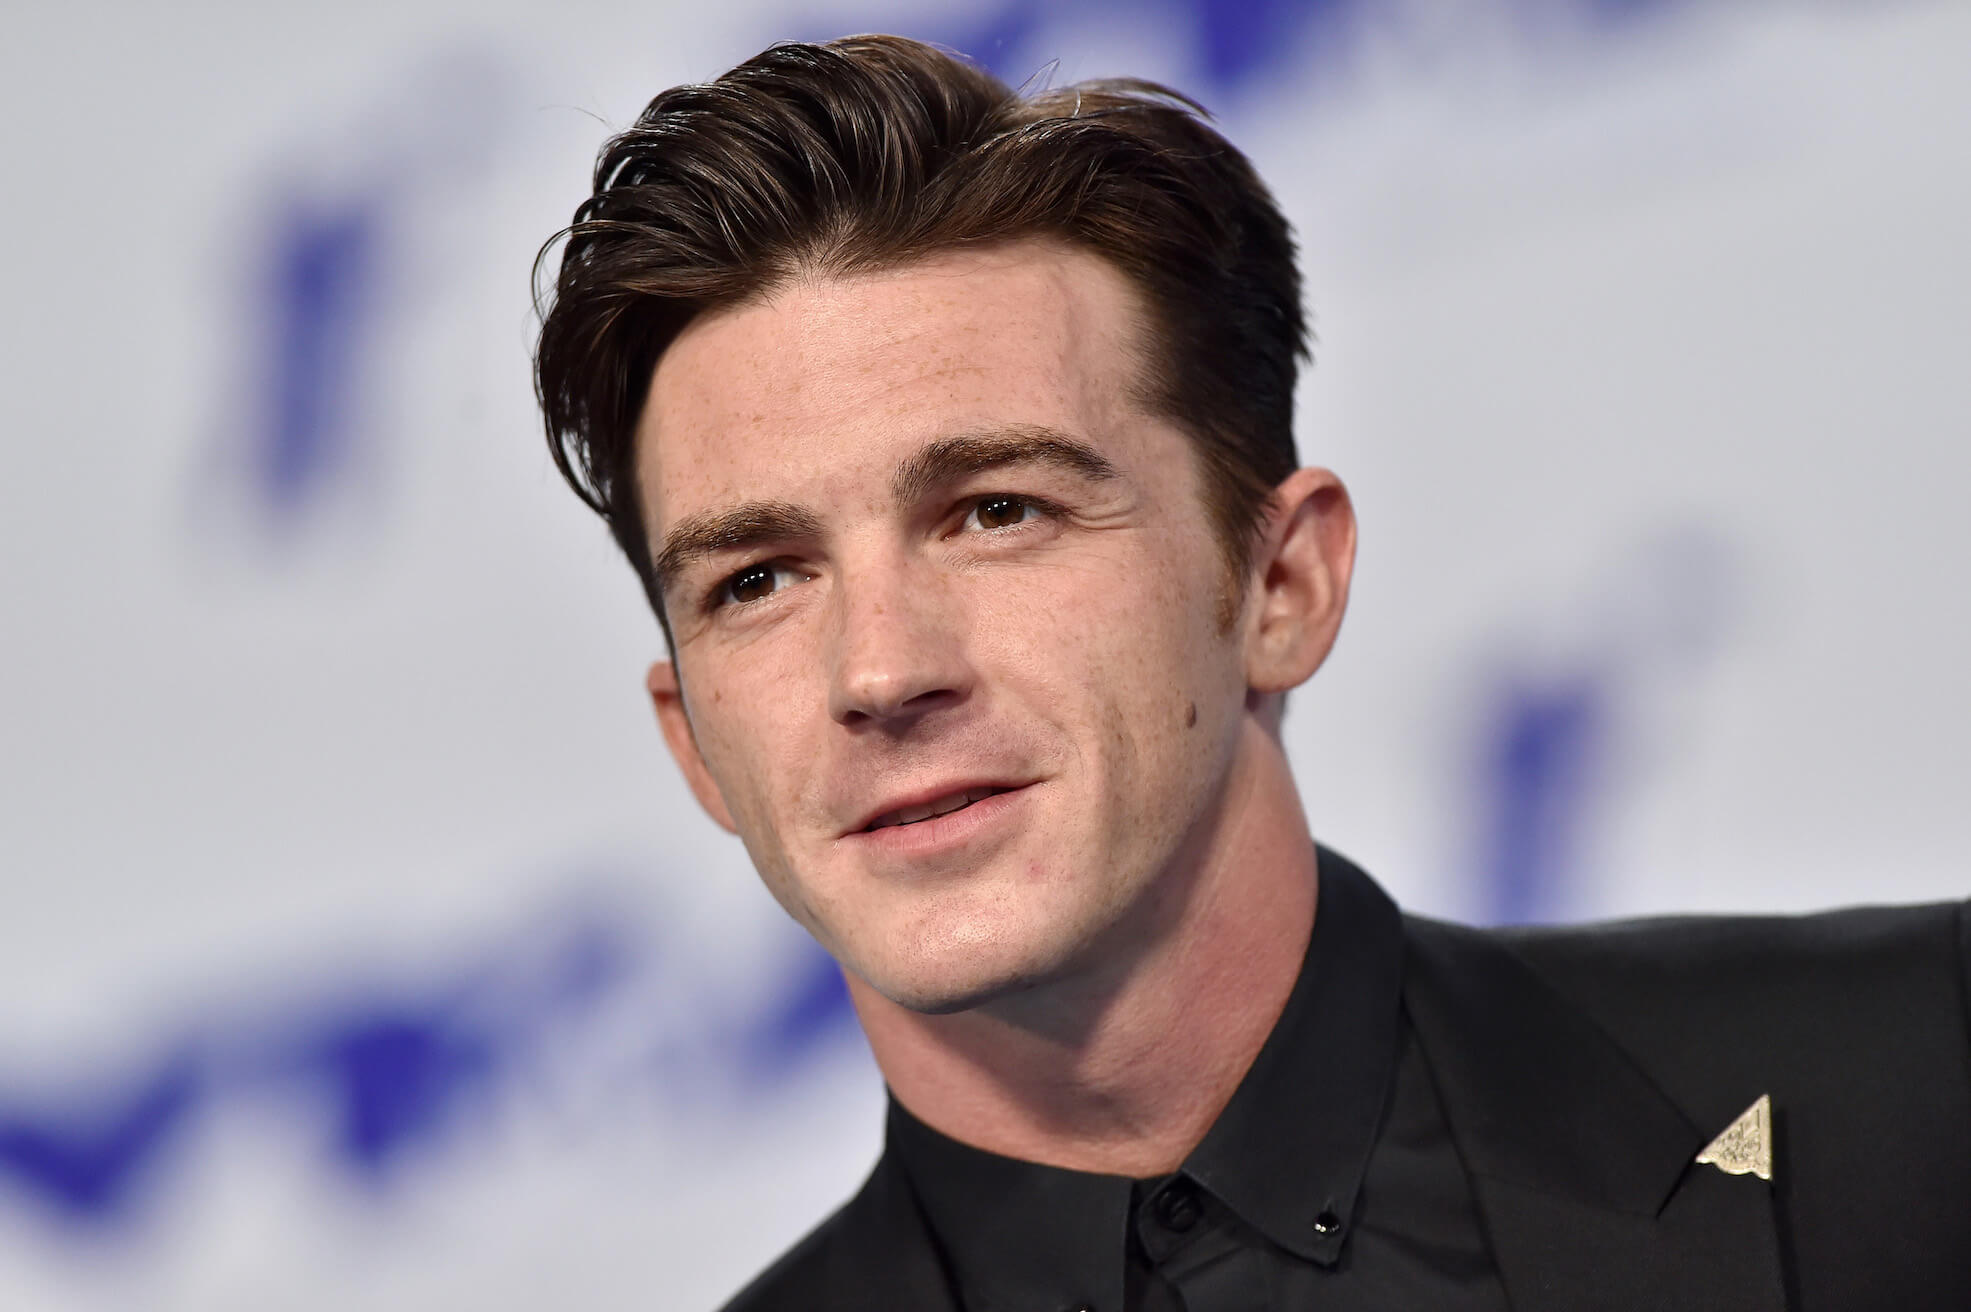 A close-up of Nickelodeon star Drake Bell in 2017